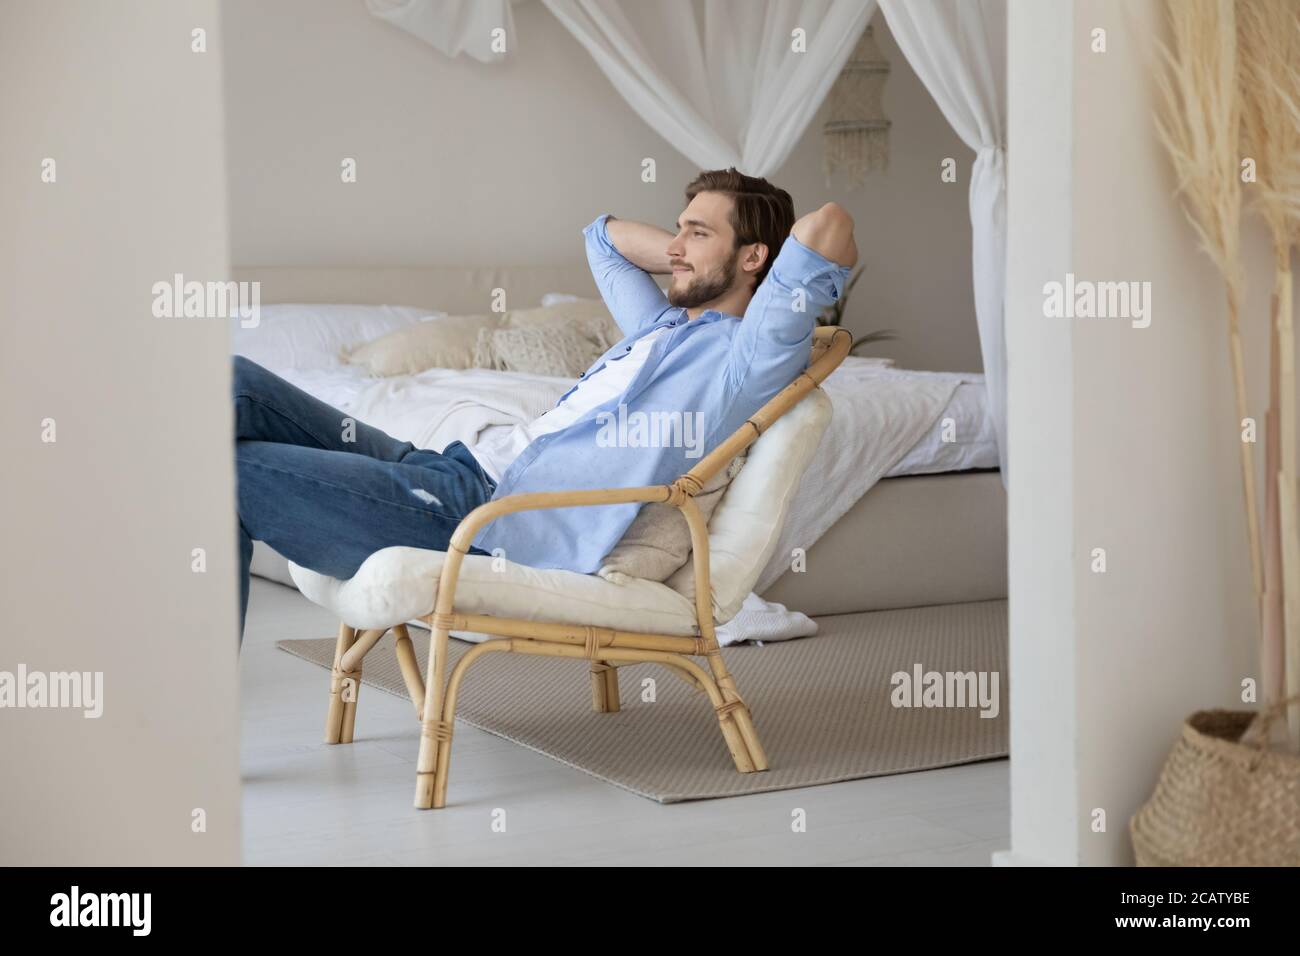 Satisfied calm young man relaxing stretching on cozy chair Stock Photo